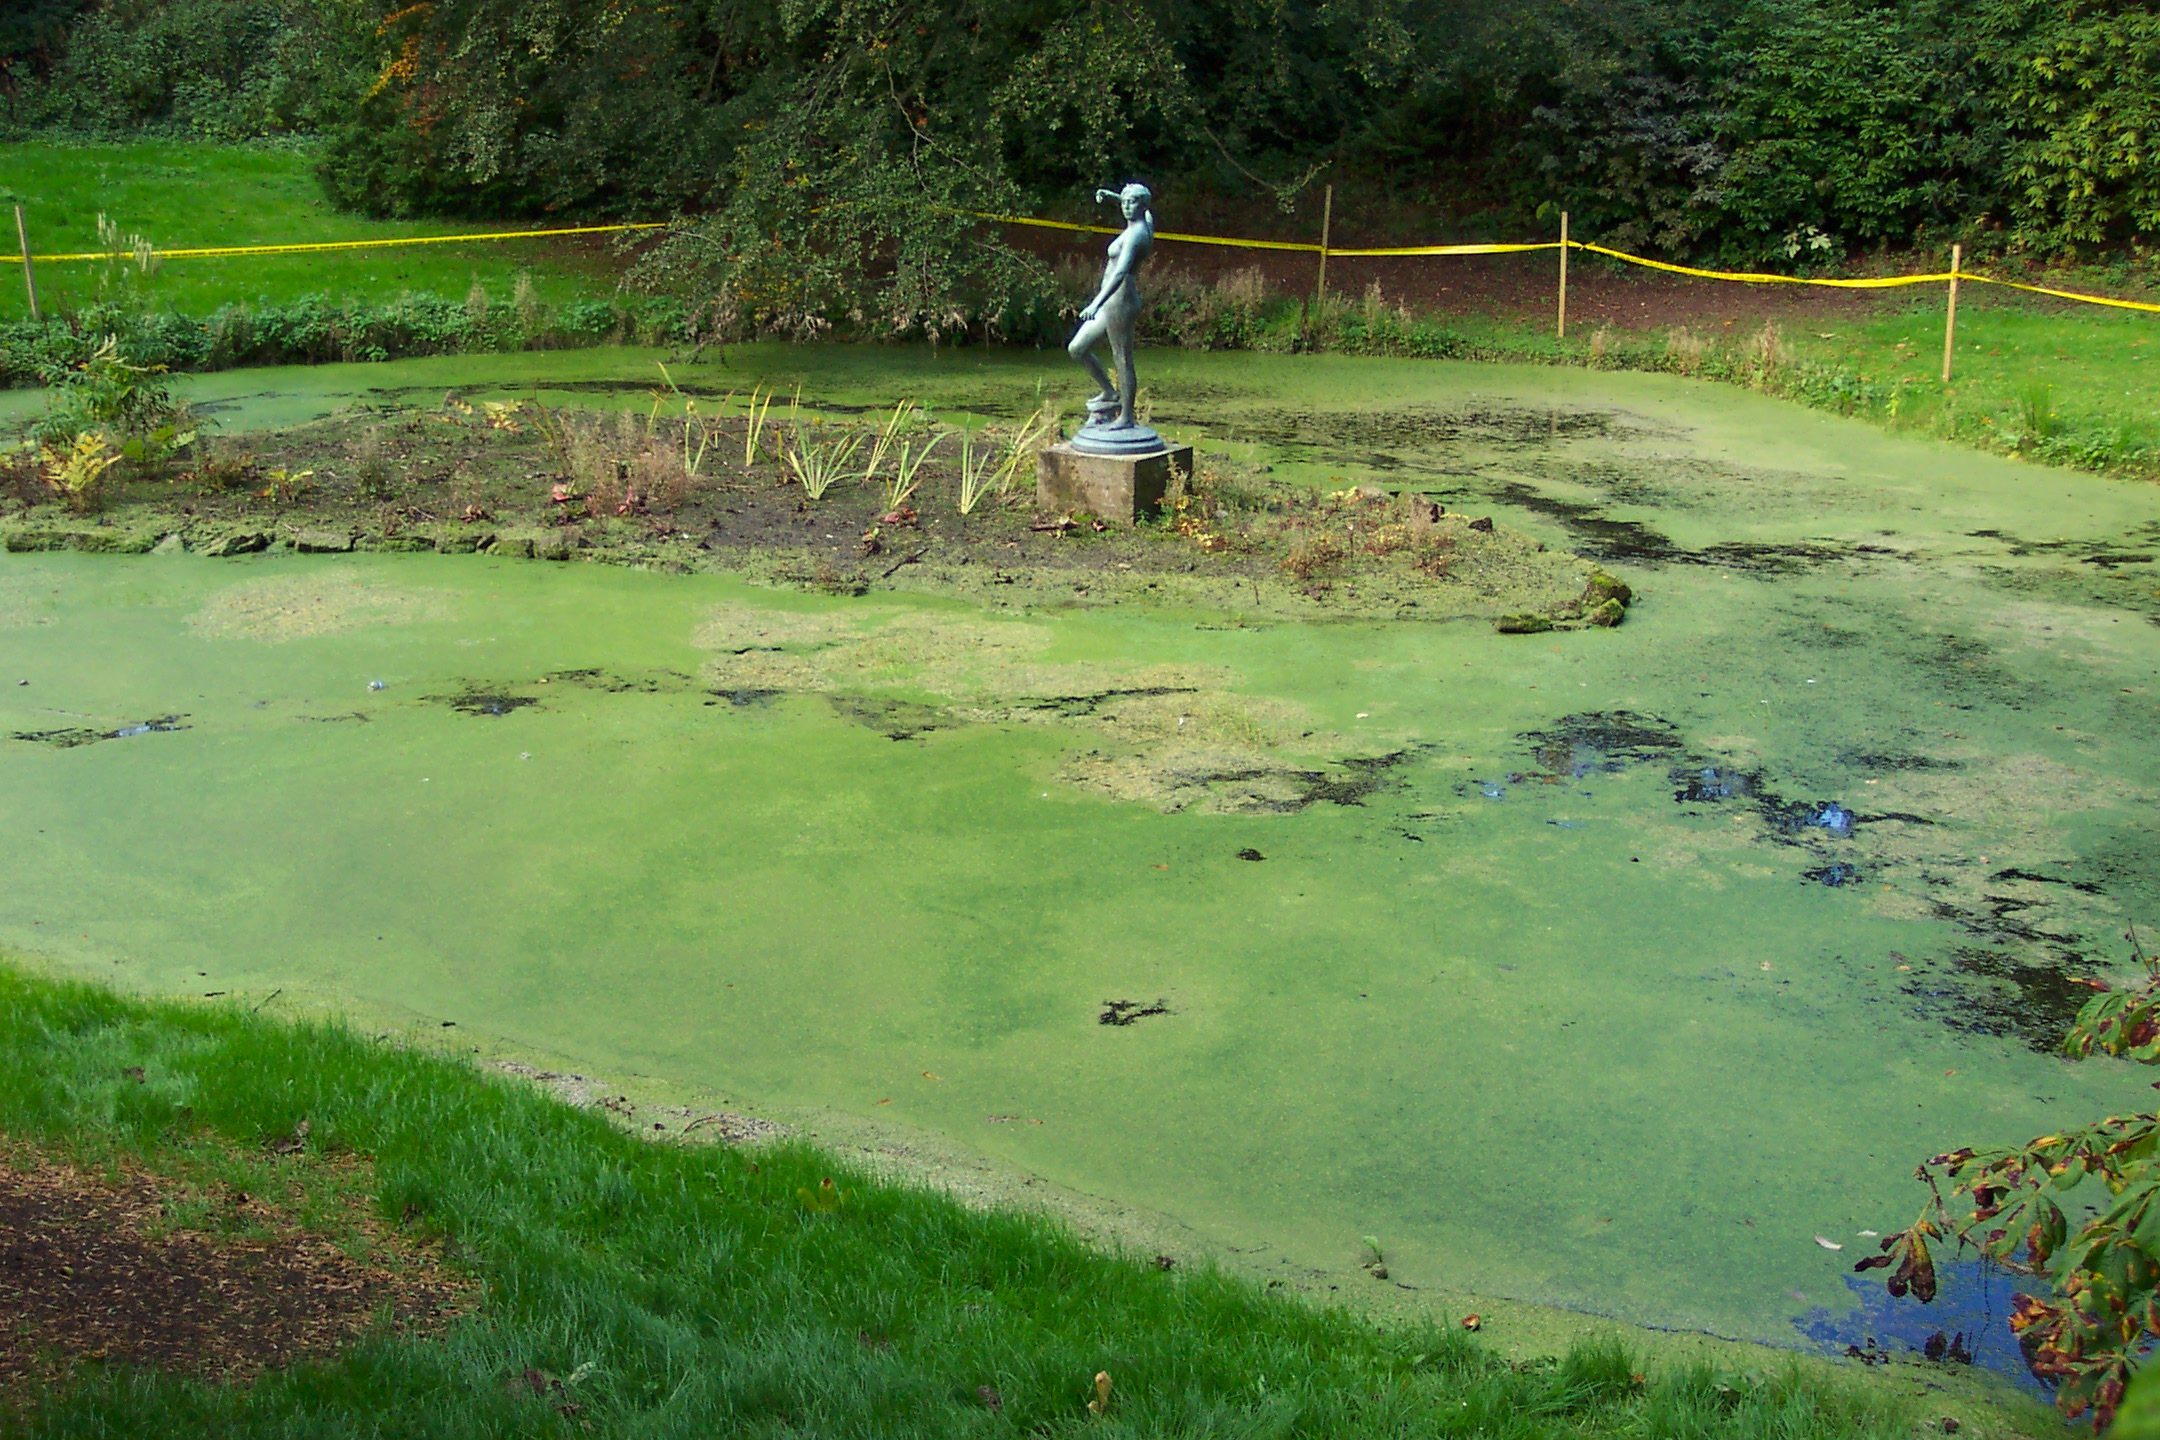 There is so much duckweed on this pond it looks like a lawn!